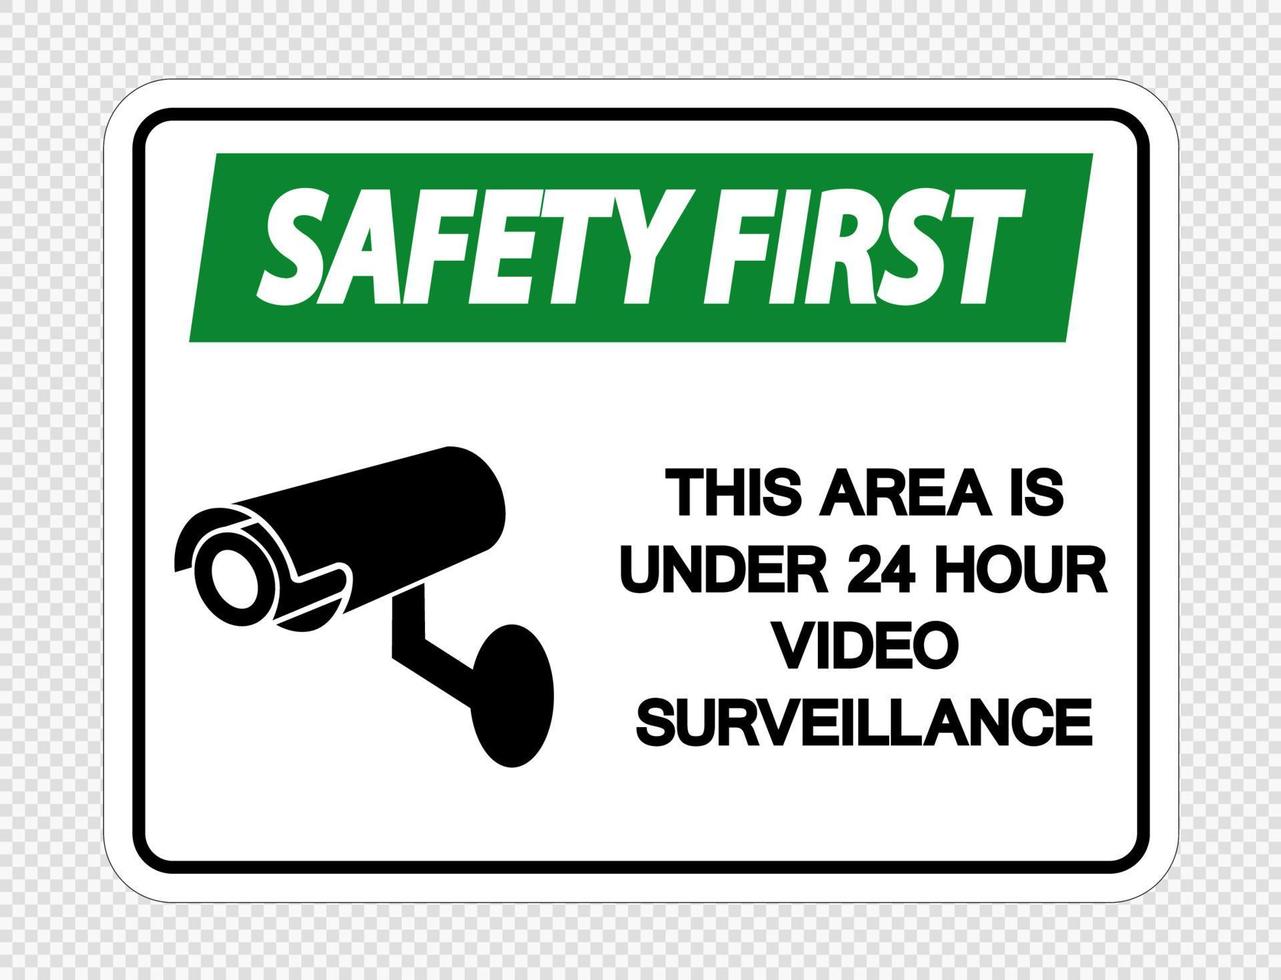 Safety first This Area is Under 24 Hour Video Surveillance Sign on transparent background vector